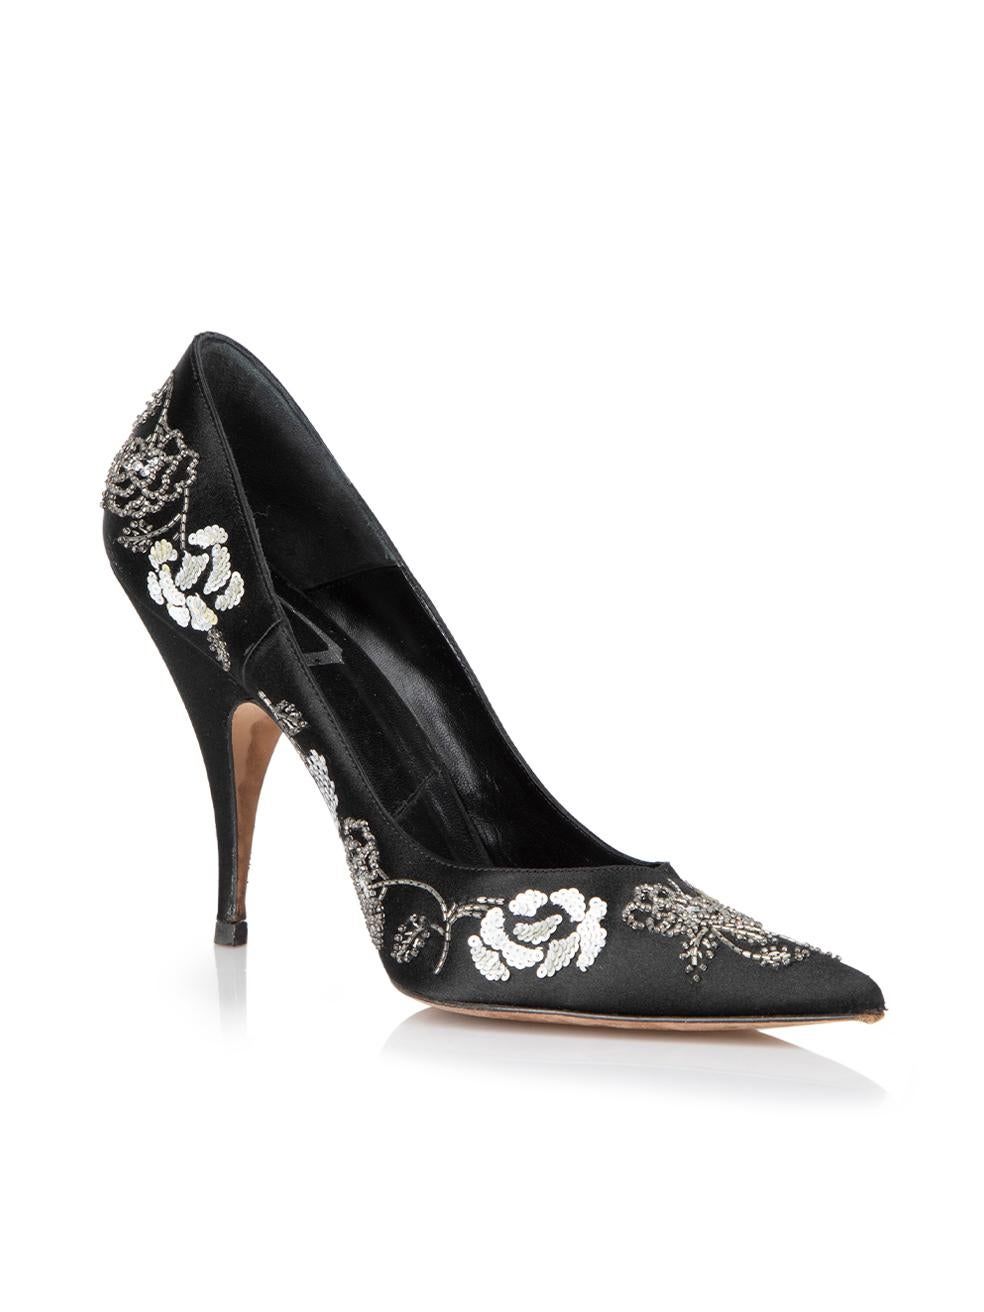 CONDITION is Very good. Minimal wear to heels is evident. Minimal wear to the satin exterior and the sequins. There is also a small scuff to the toe point of the left heel on this used Dior designer resale item. 
 
 Details
  Black
 Satin
 Slip on